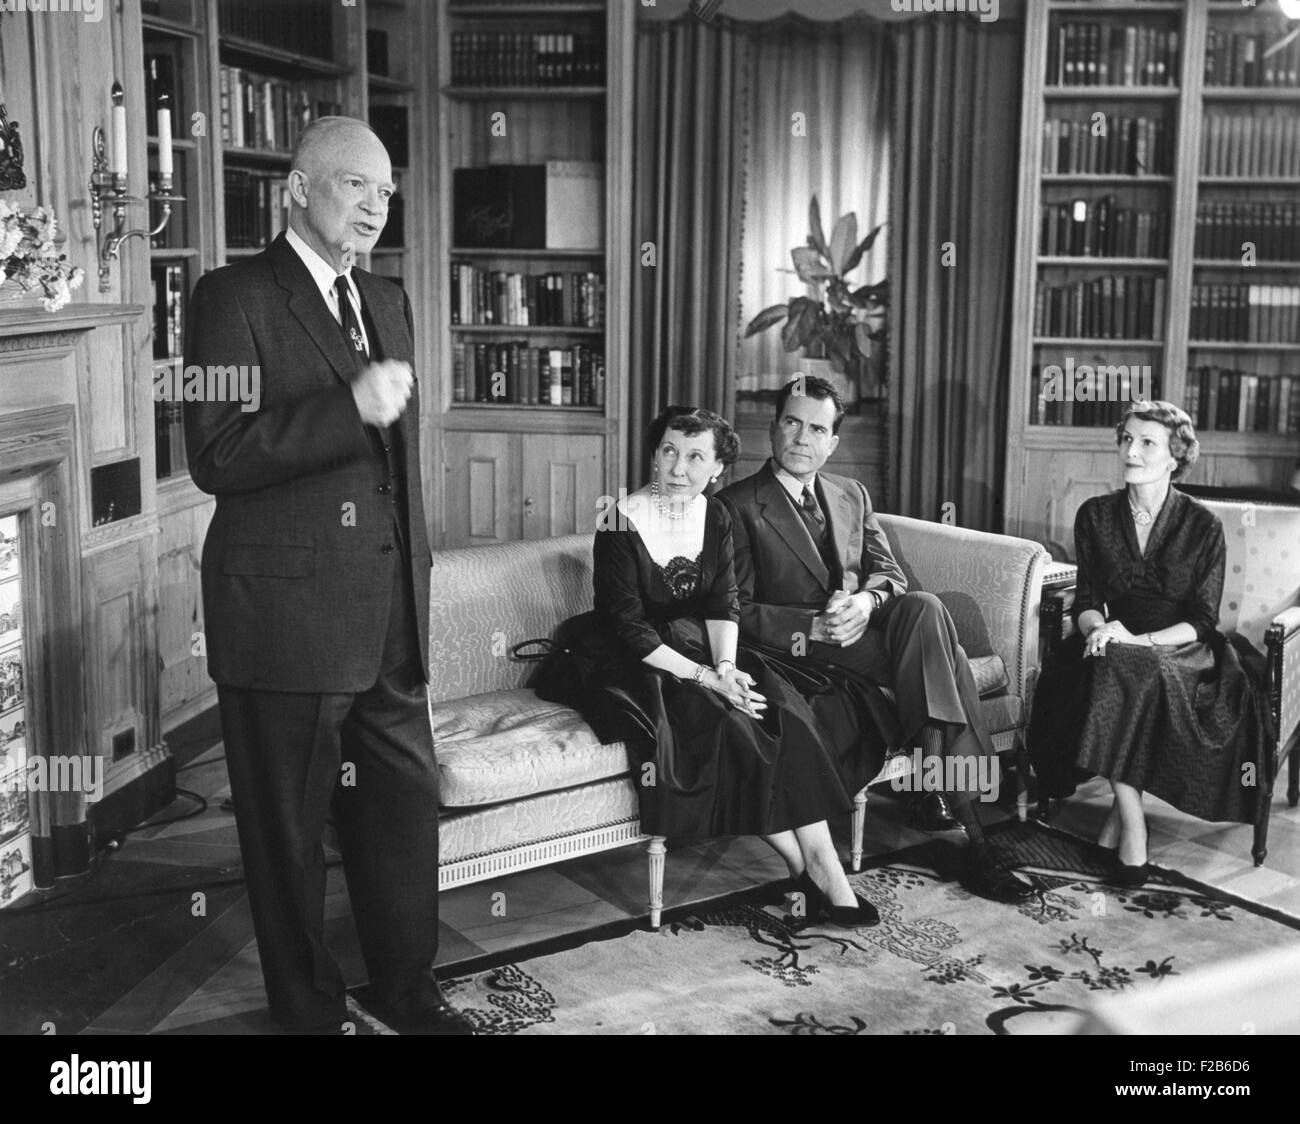 President Eisenhower speaking on election eve, Nov. 5, 1956. Seated are Mamie Eisenhower with Pat and Richard Nixon. - (BSLOC 2014 16 10) Stock Photo